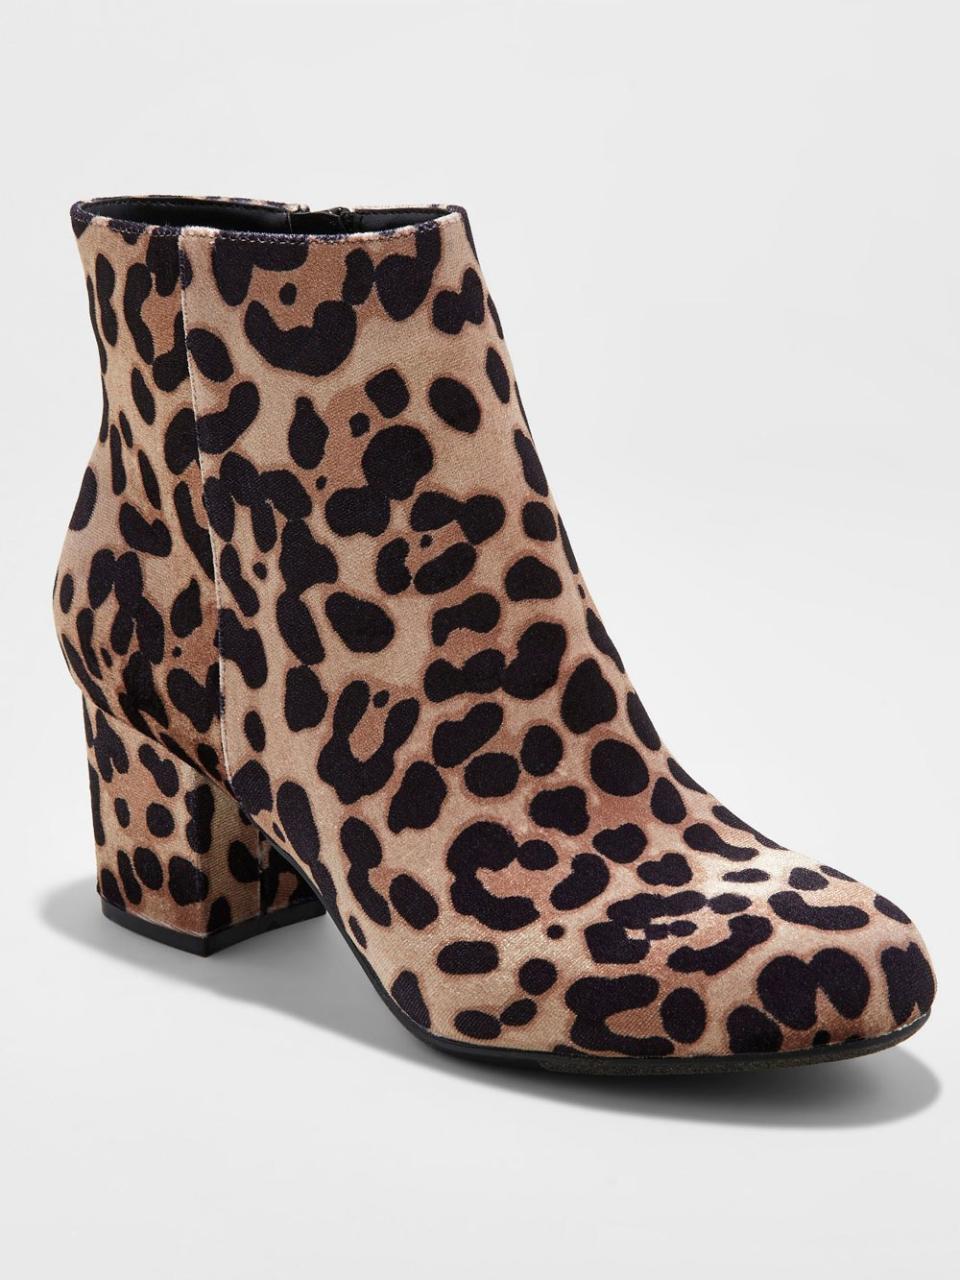 Fresh Ways to Wear Leopard Print This Fall: Ankle Boots